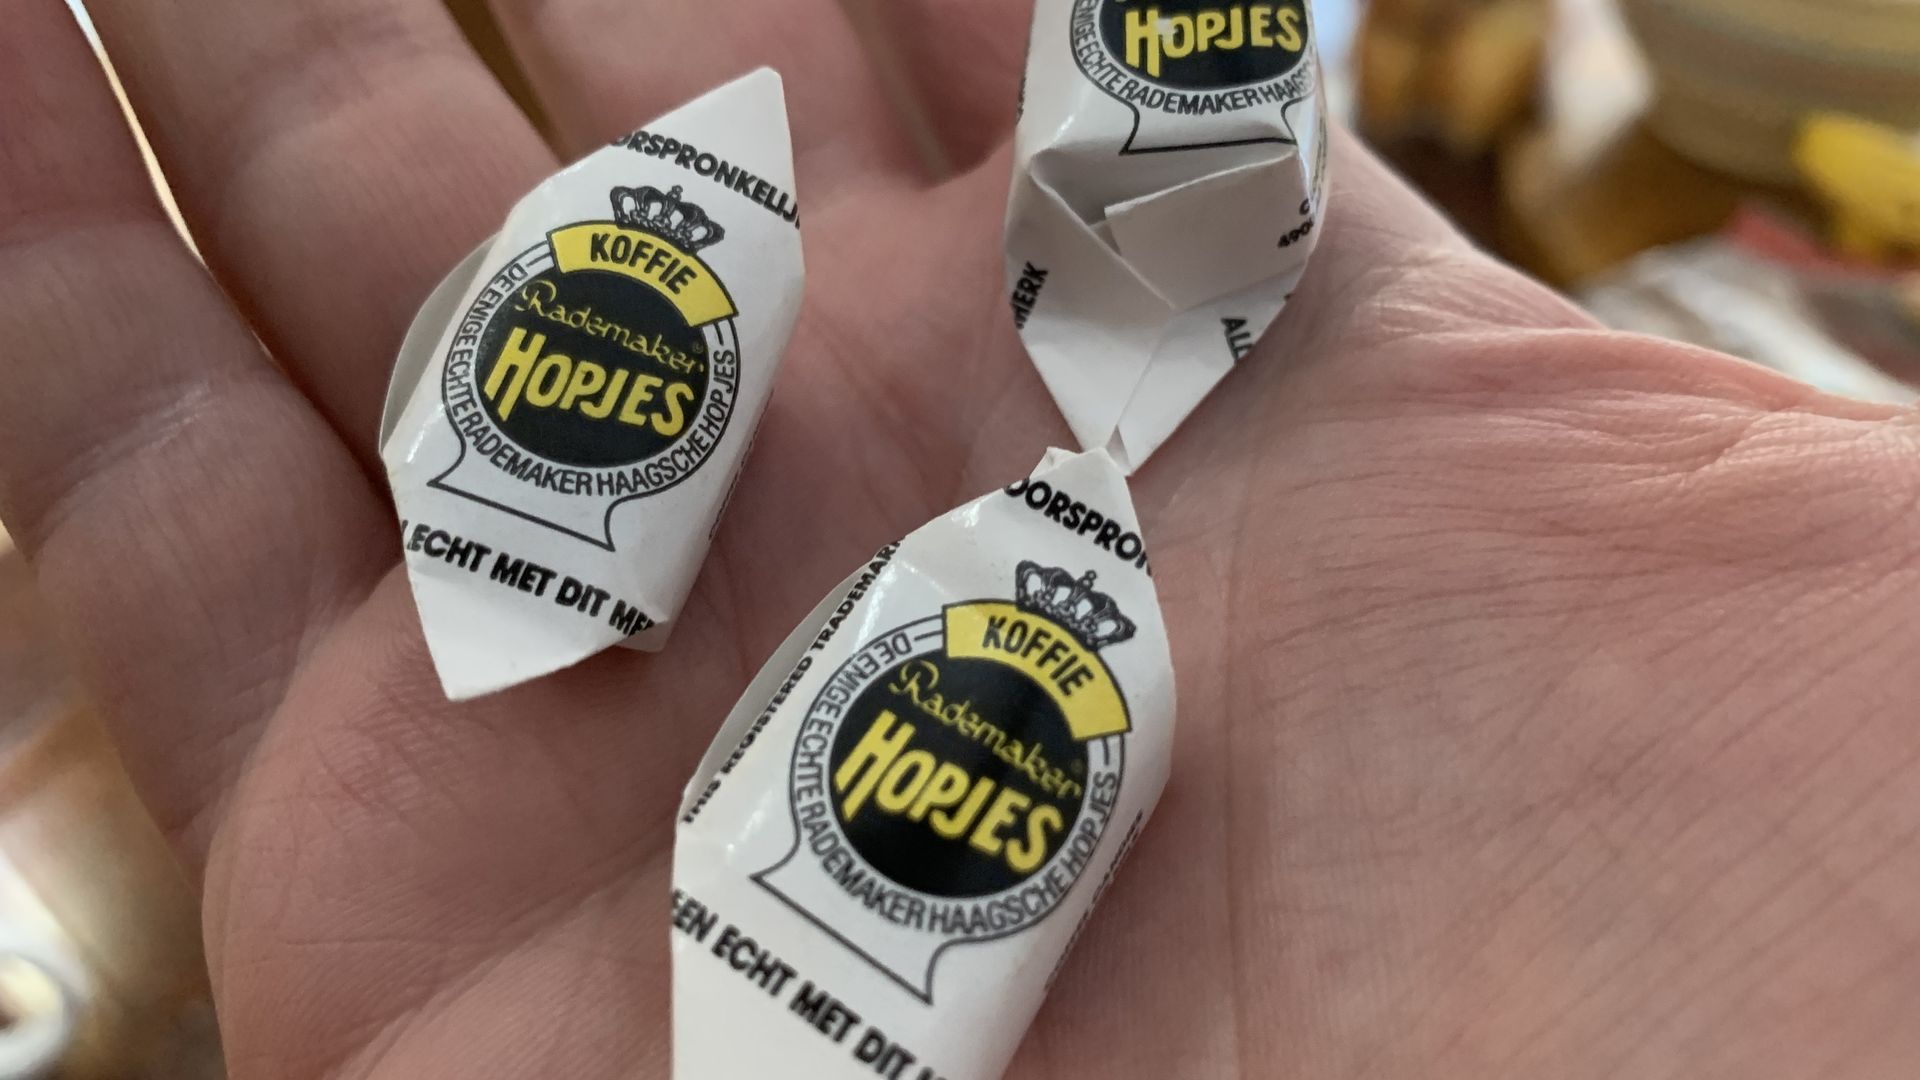 Three candy wrappers that say "Hopjes"